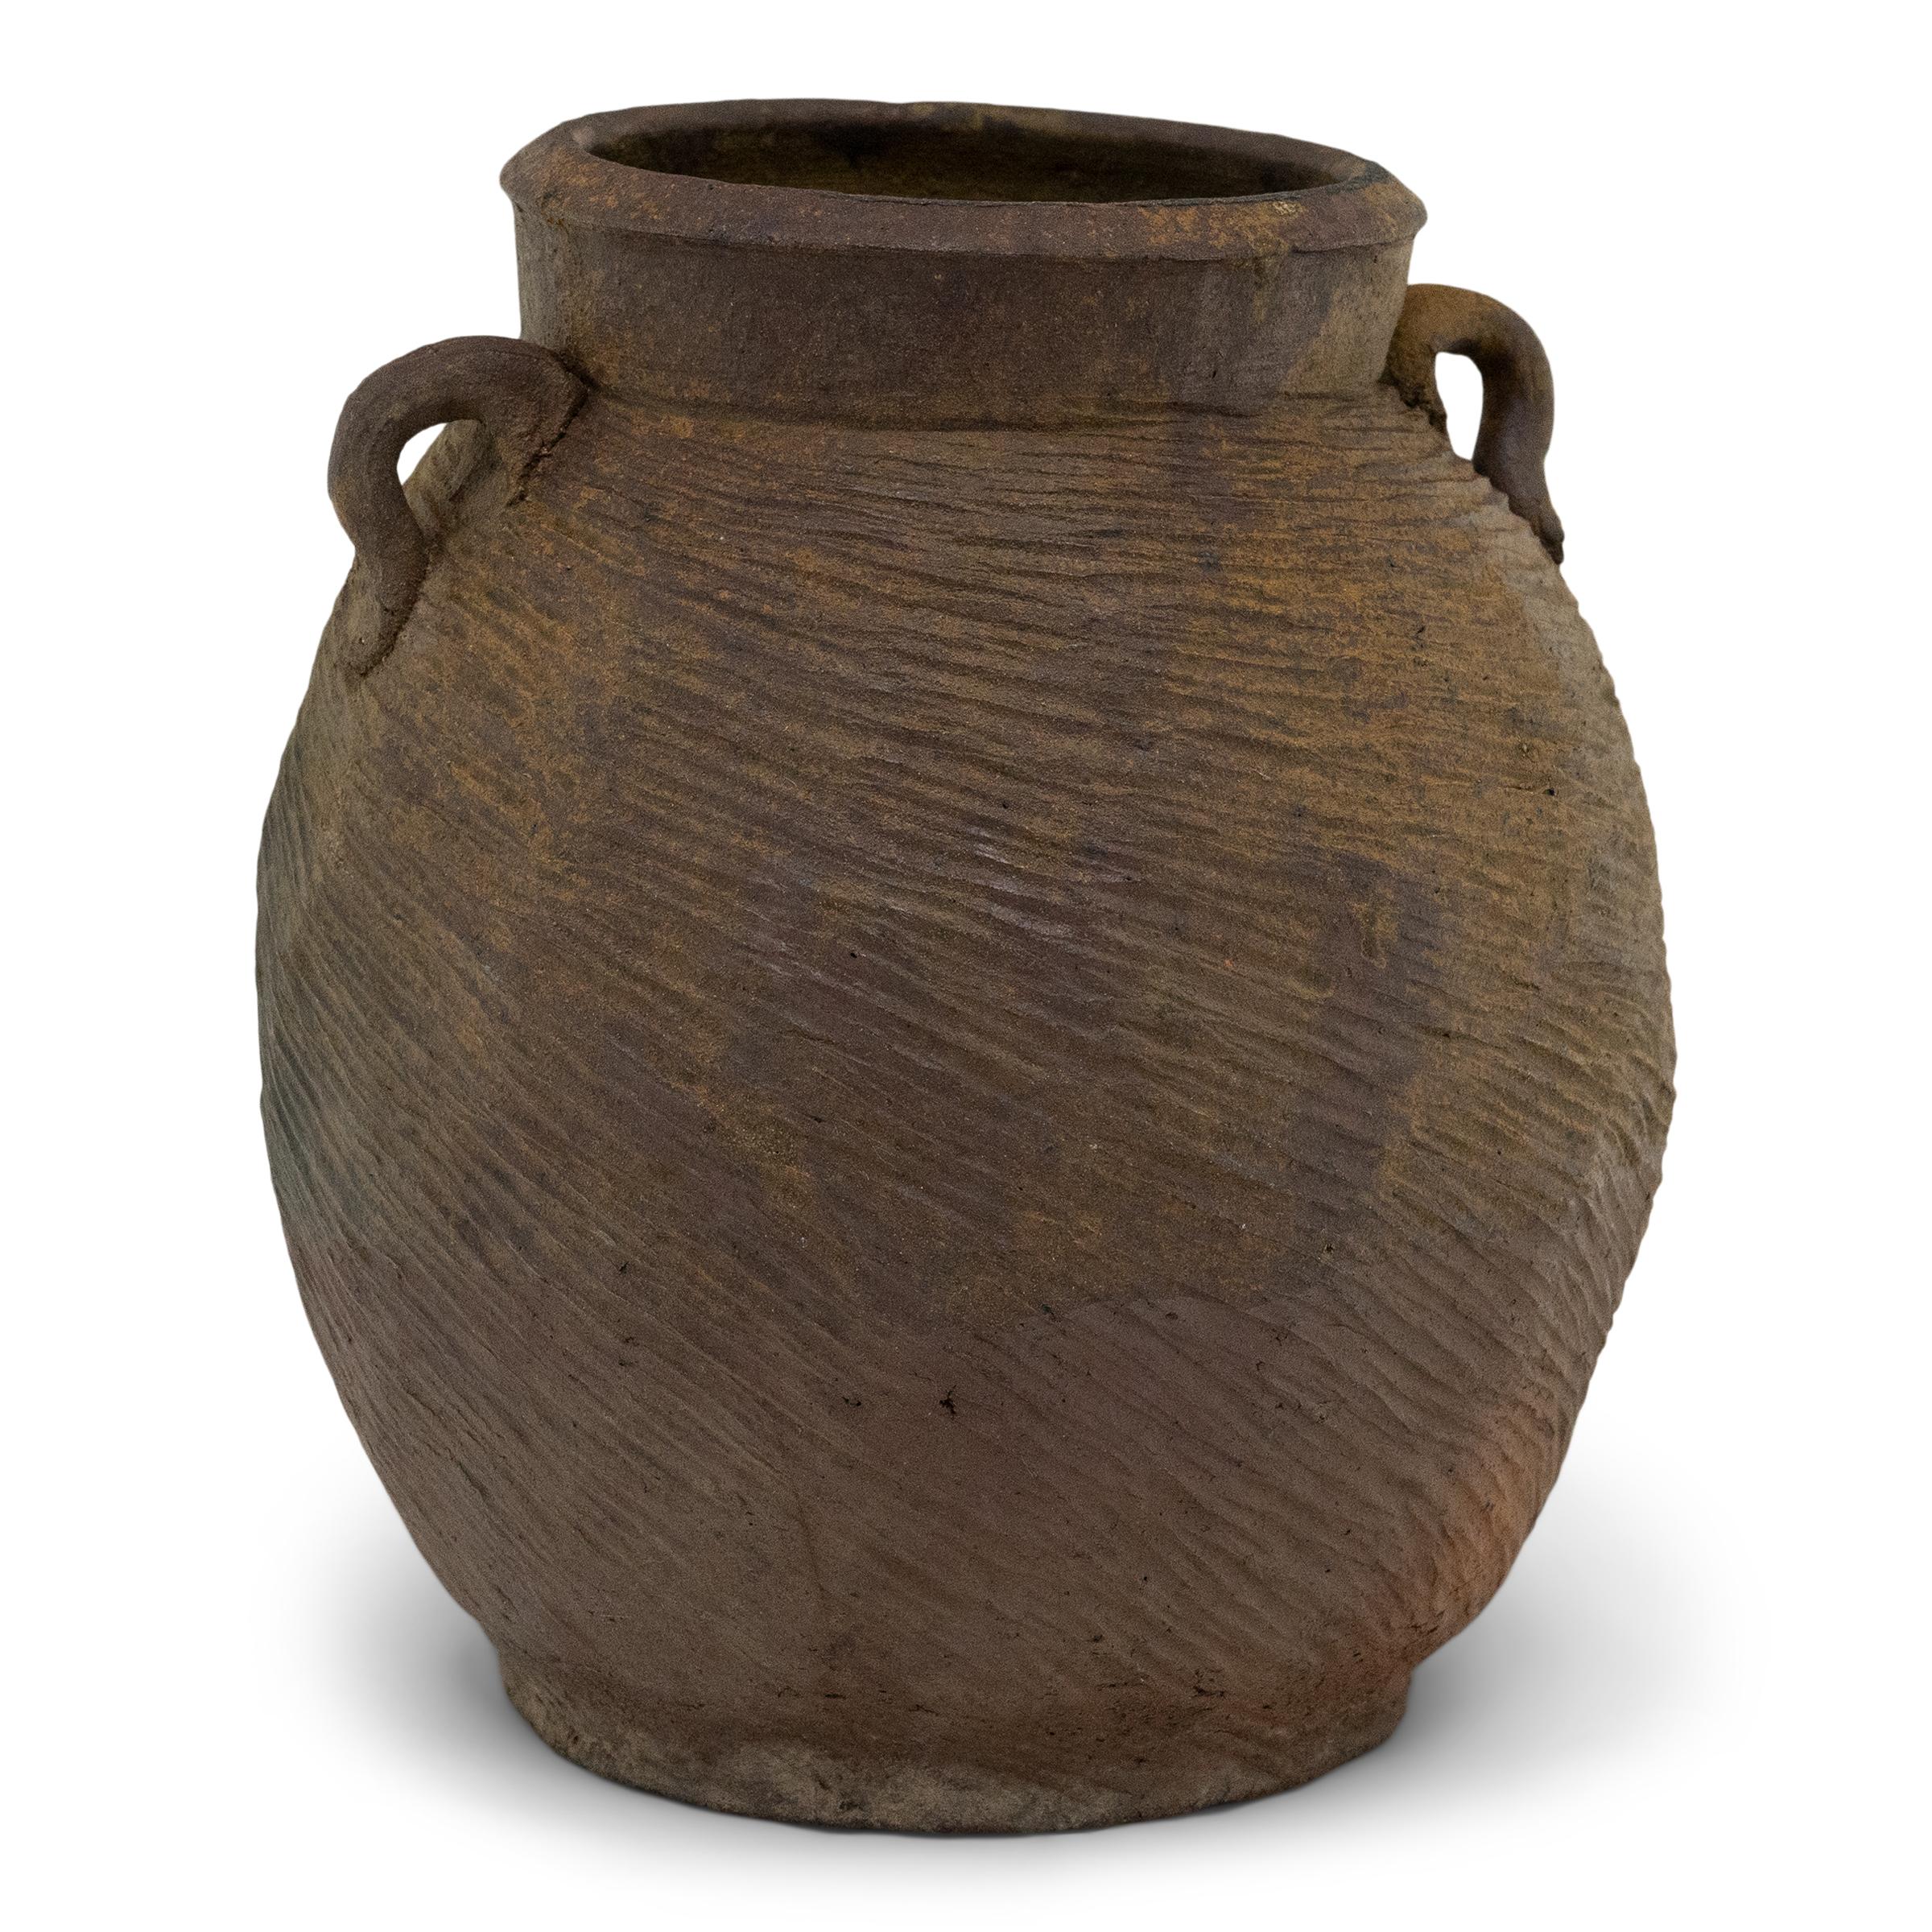 Charged with the humble task of storing dry goods, this small terracotta pot was hand-shaped in the 19th century with balanced proportions and a beautifully irregular brown slip finish. The lobed pot features a round form with a narrow base and a